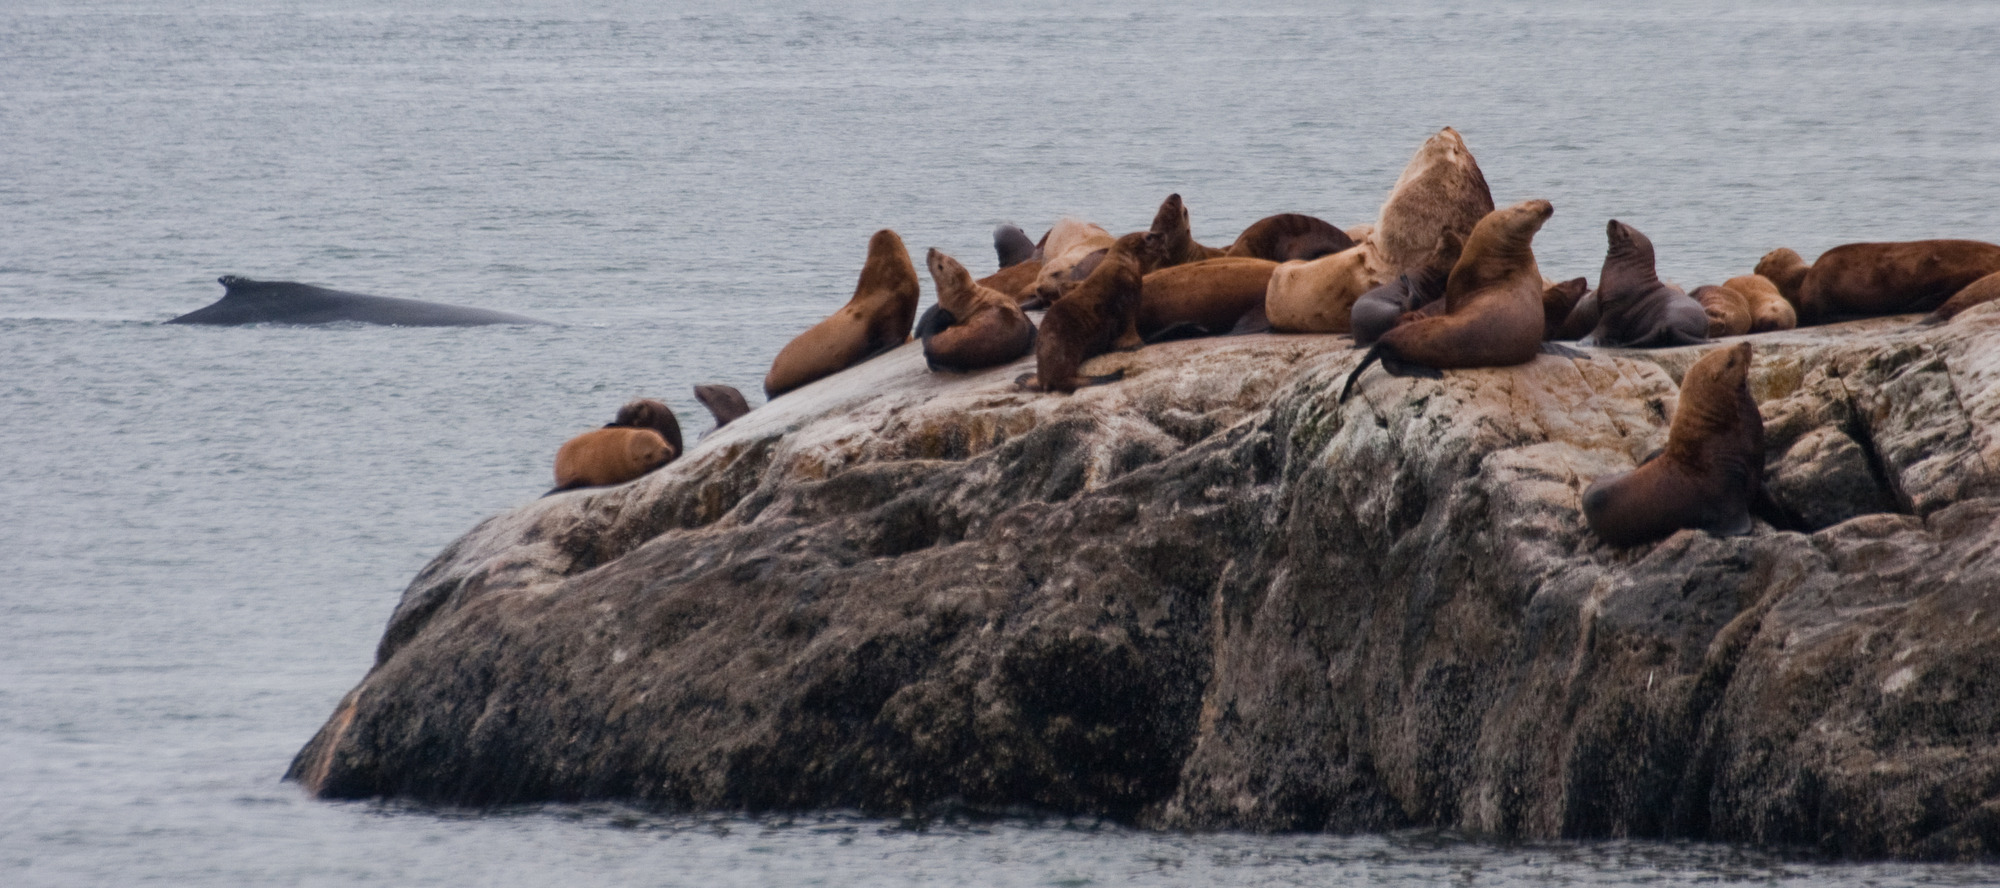 Stellar's Sea Lions hauled out with a Humpback Whale in the background